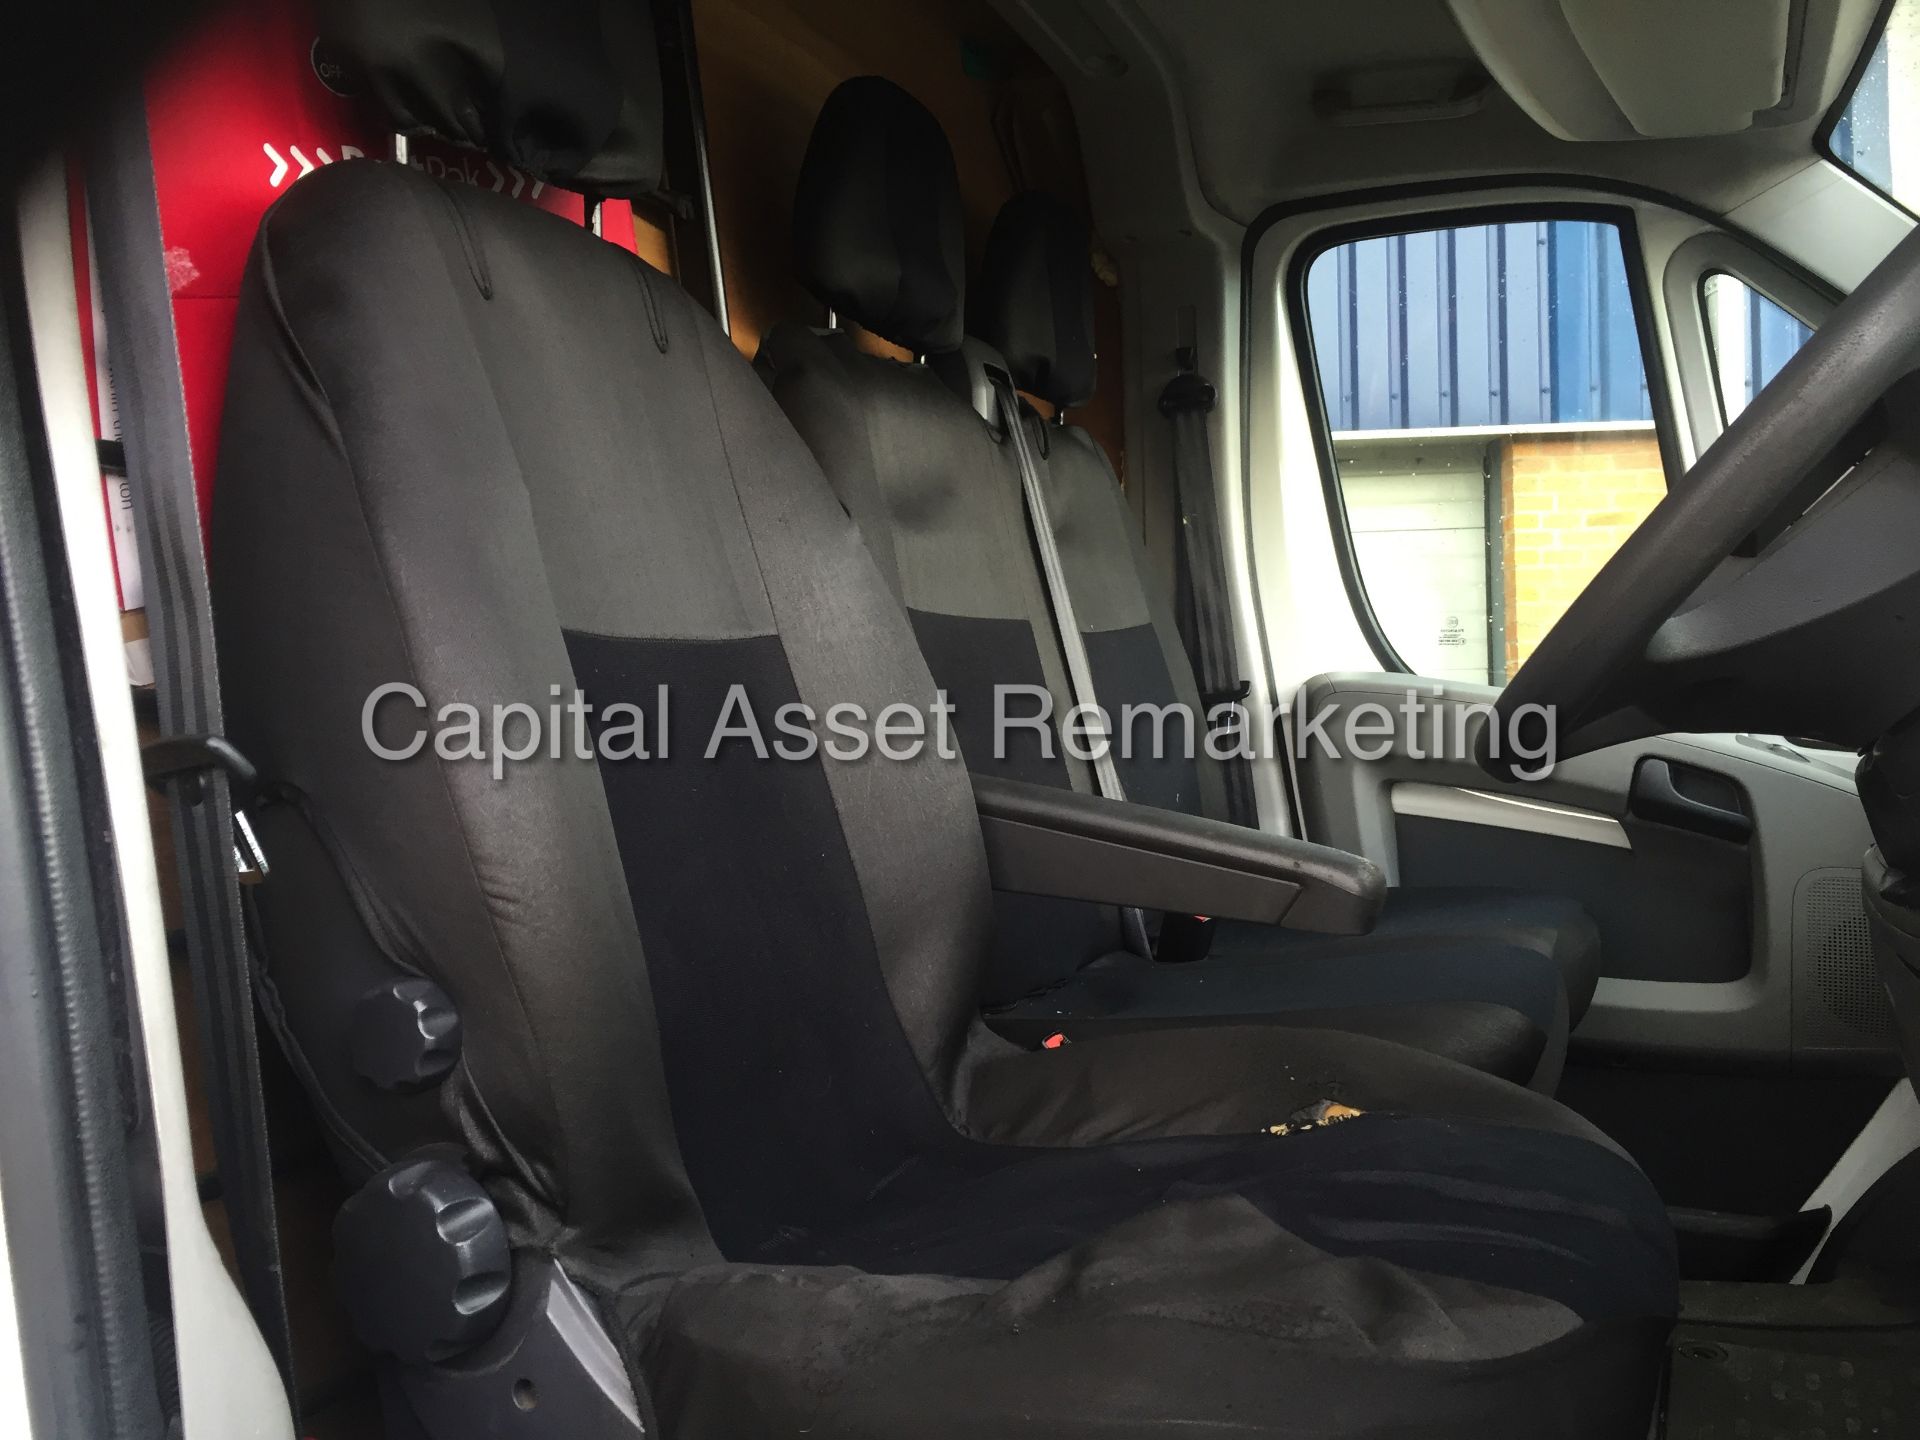 CITROEN RELAY 35 LWB HI-ROOF (2011 MODEL) 2.2 HDI - 120 PS - 6 SPEED (ELECTRIC PACK) - Image 12 of 19